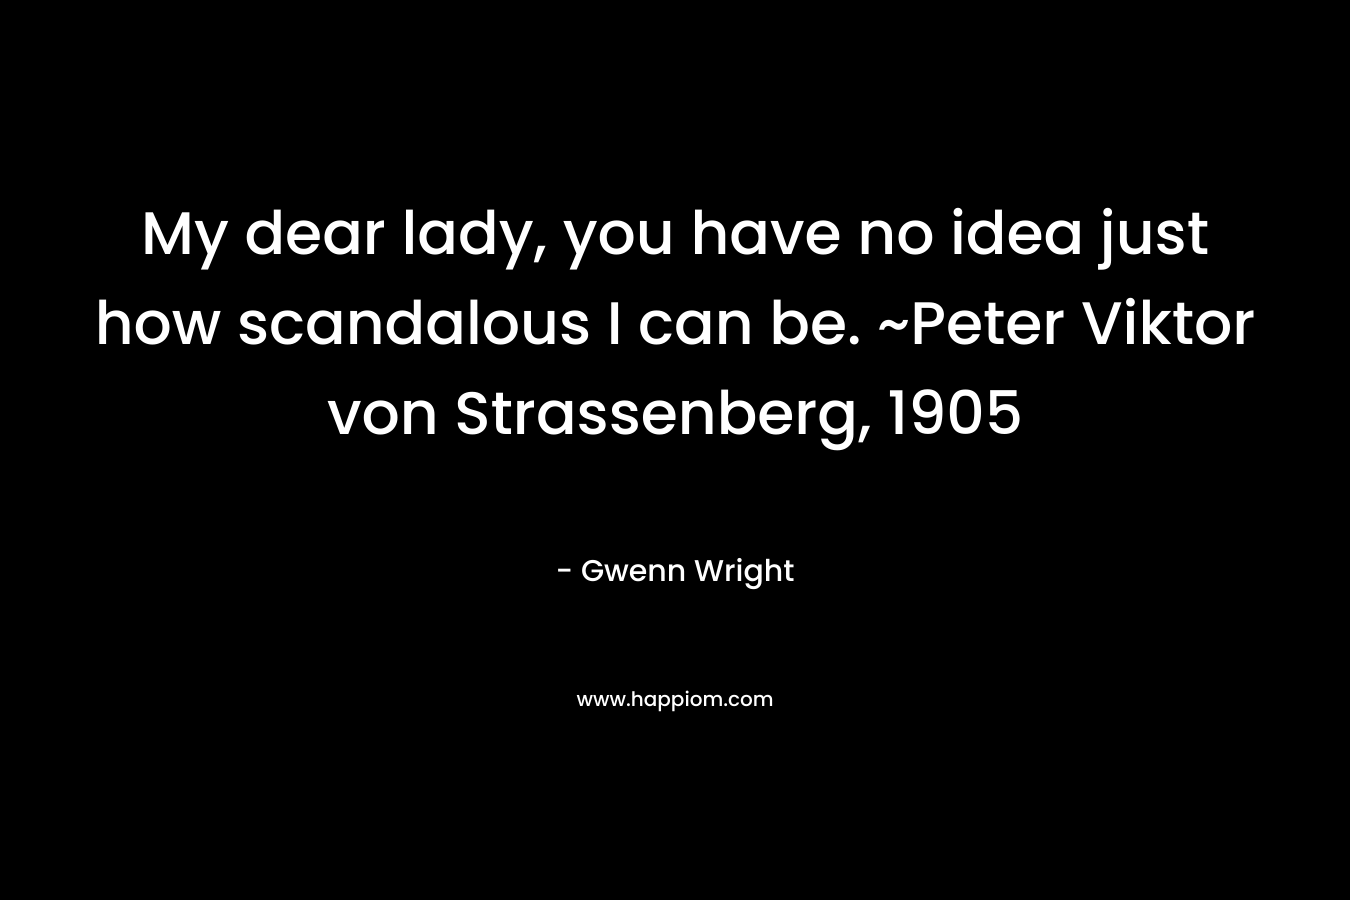 My dear lady, you have no idea just how scandalous I can be. ~Peter Viktor von Strassenberg, 1905